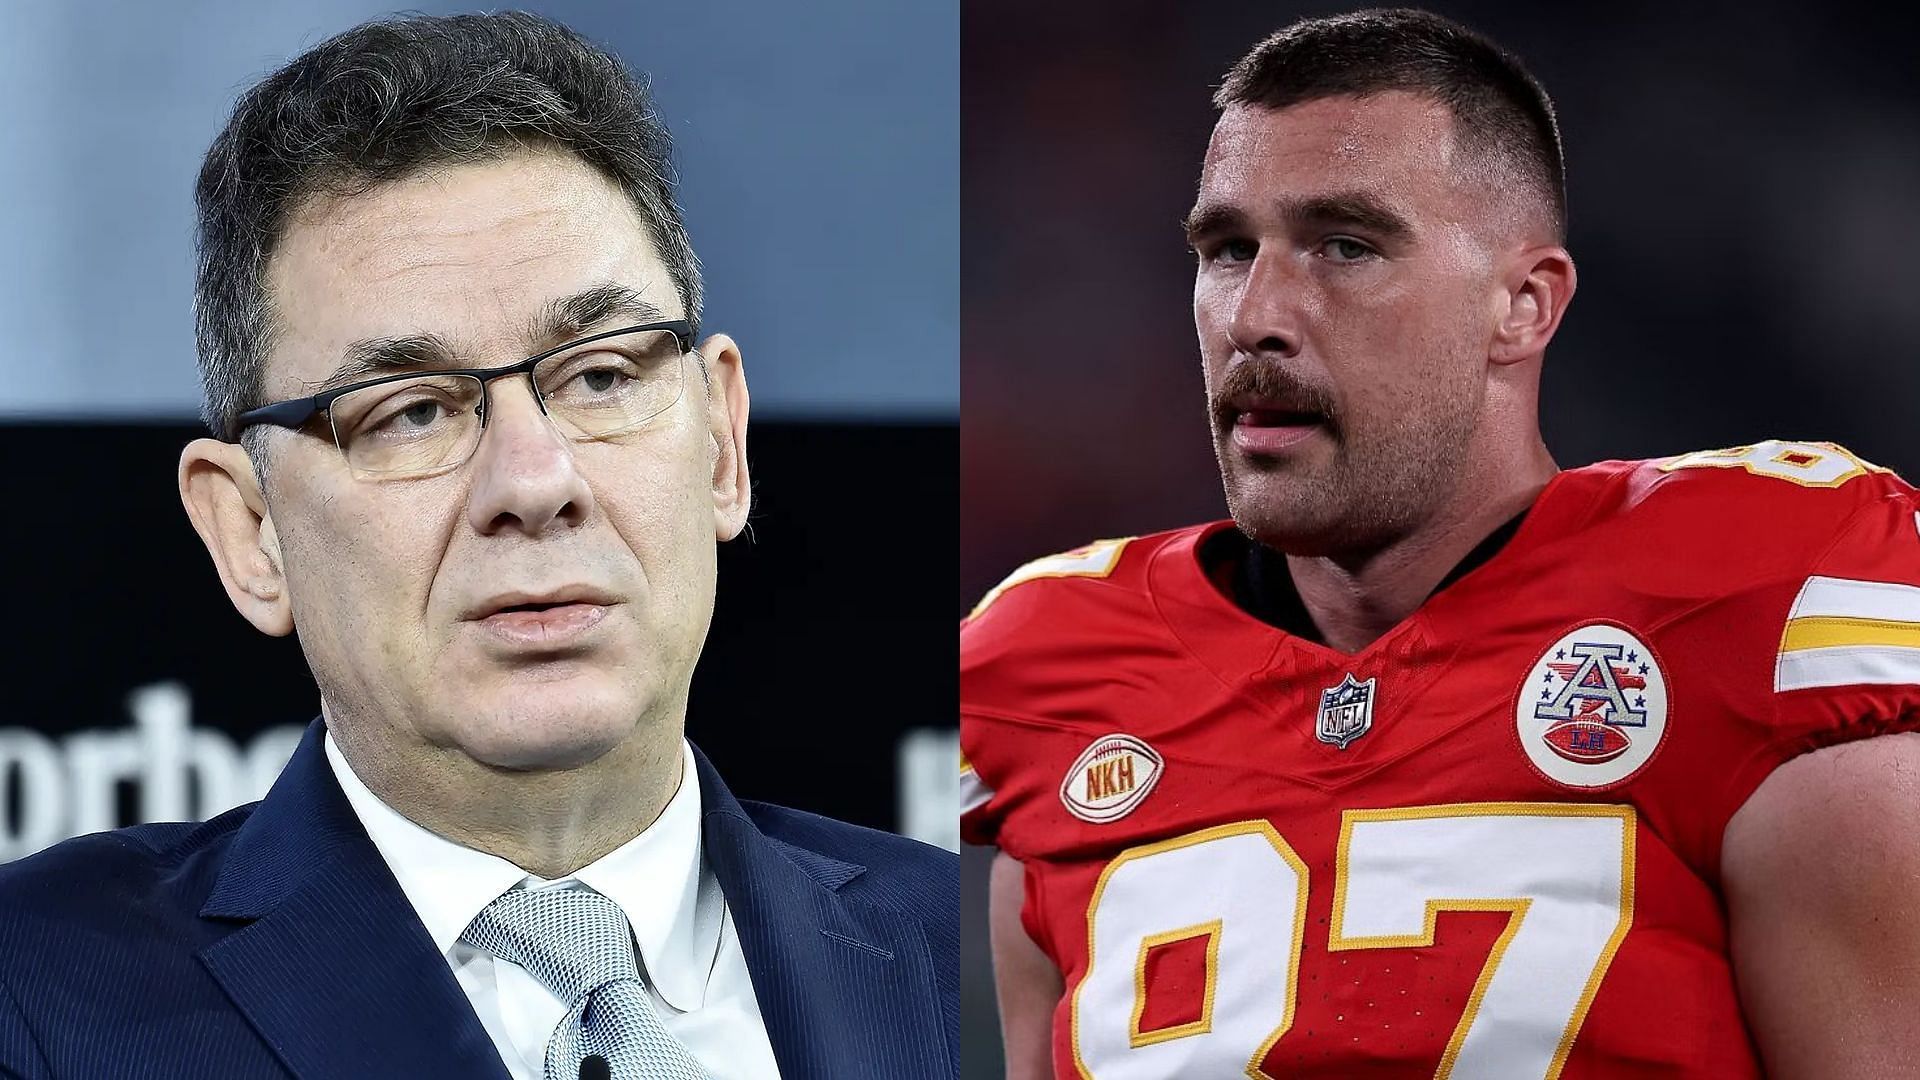 Pfizer CEO Albert Bourla and Travis Kelce (Image credit: Getty Images)